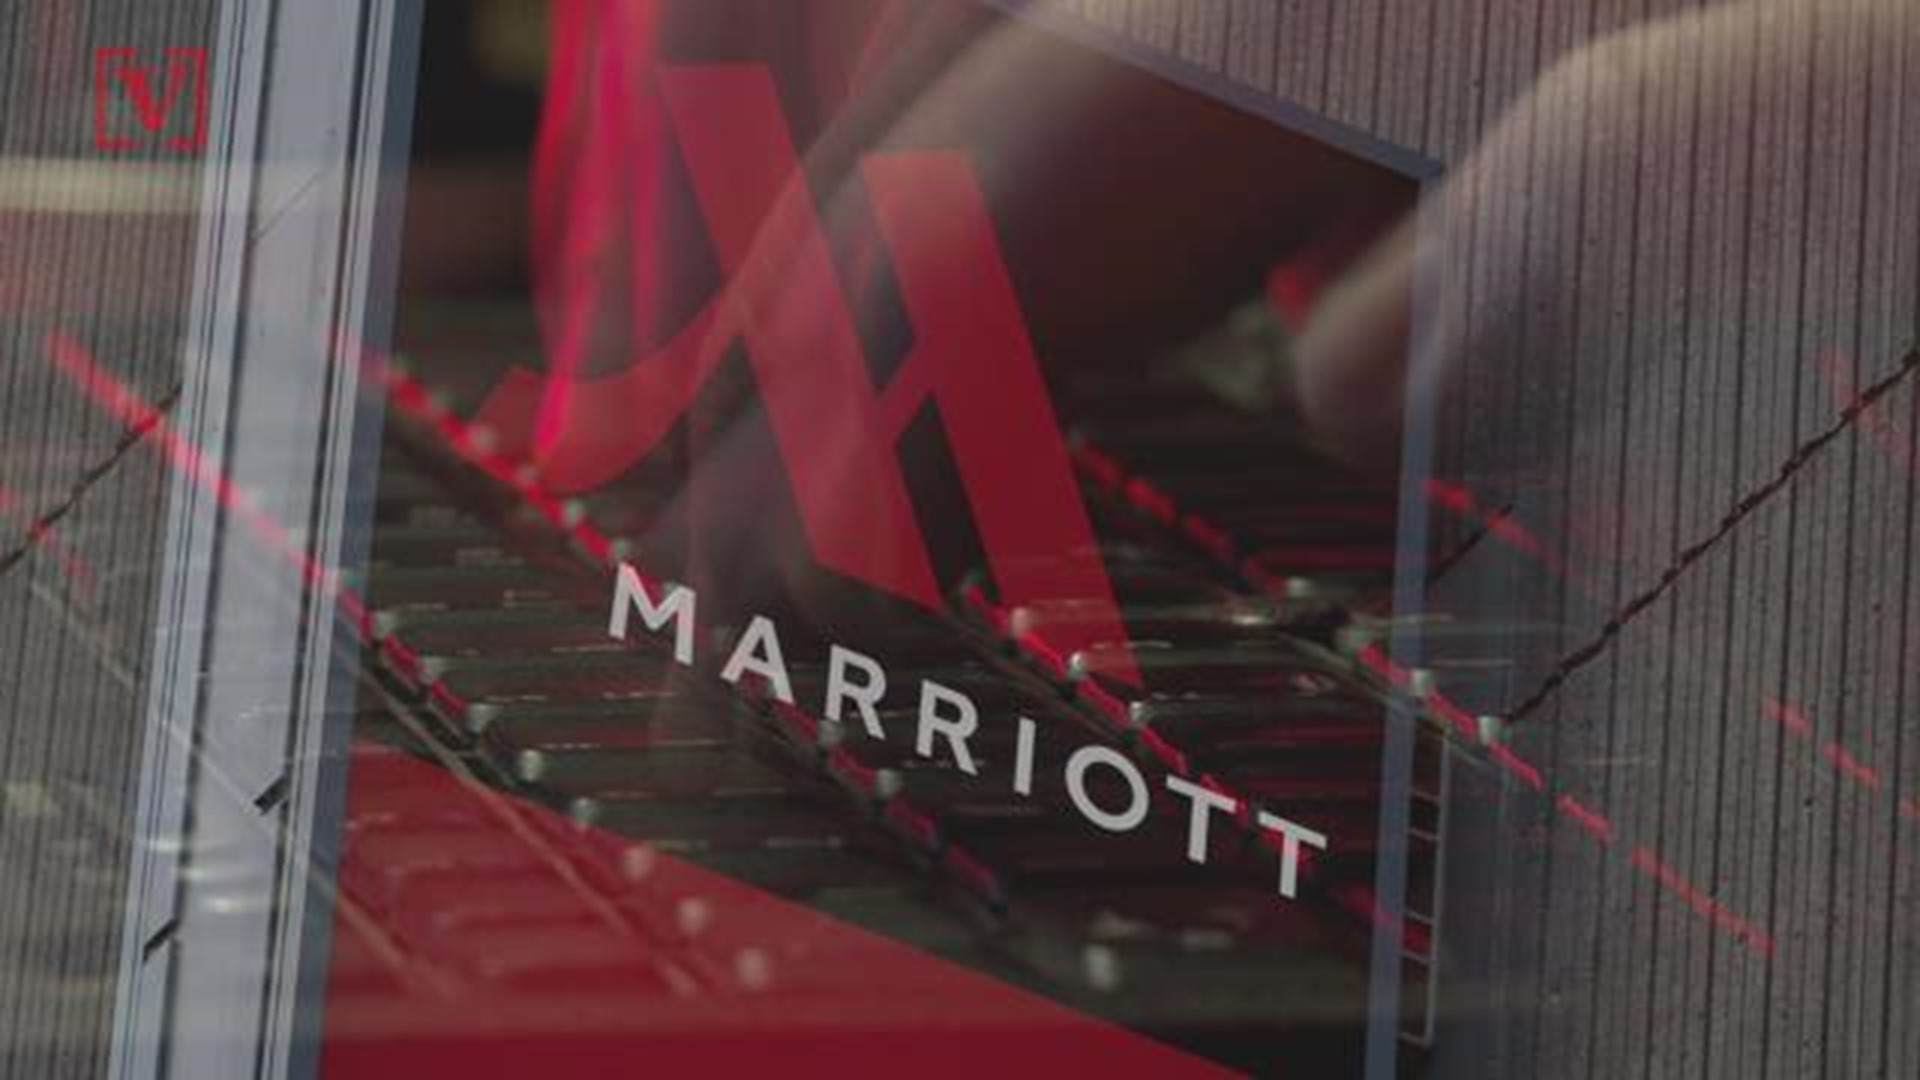 In a massive data breach, Marriott says that the personal information of over 500 million guests has potentially been exposed.